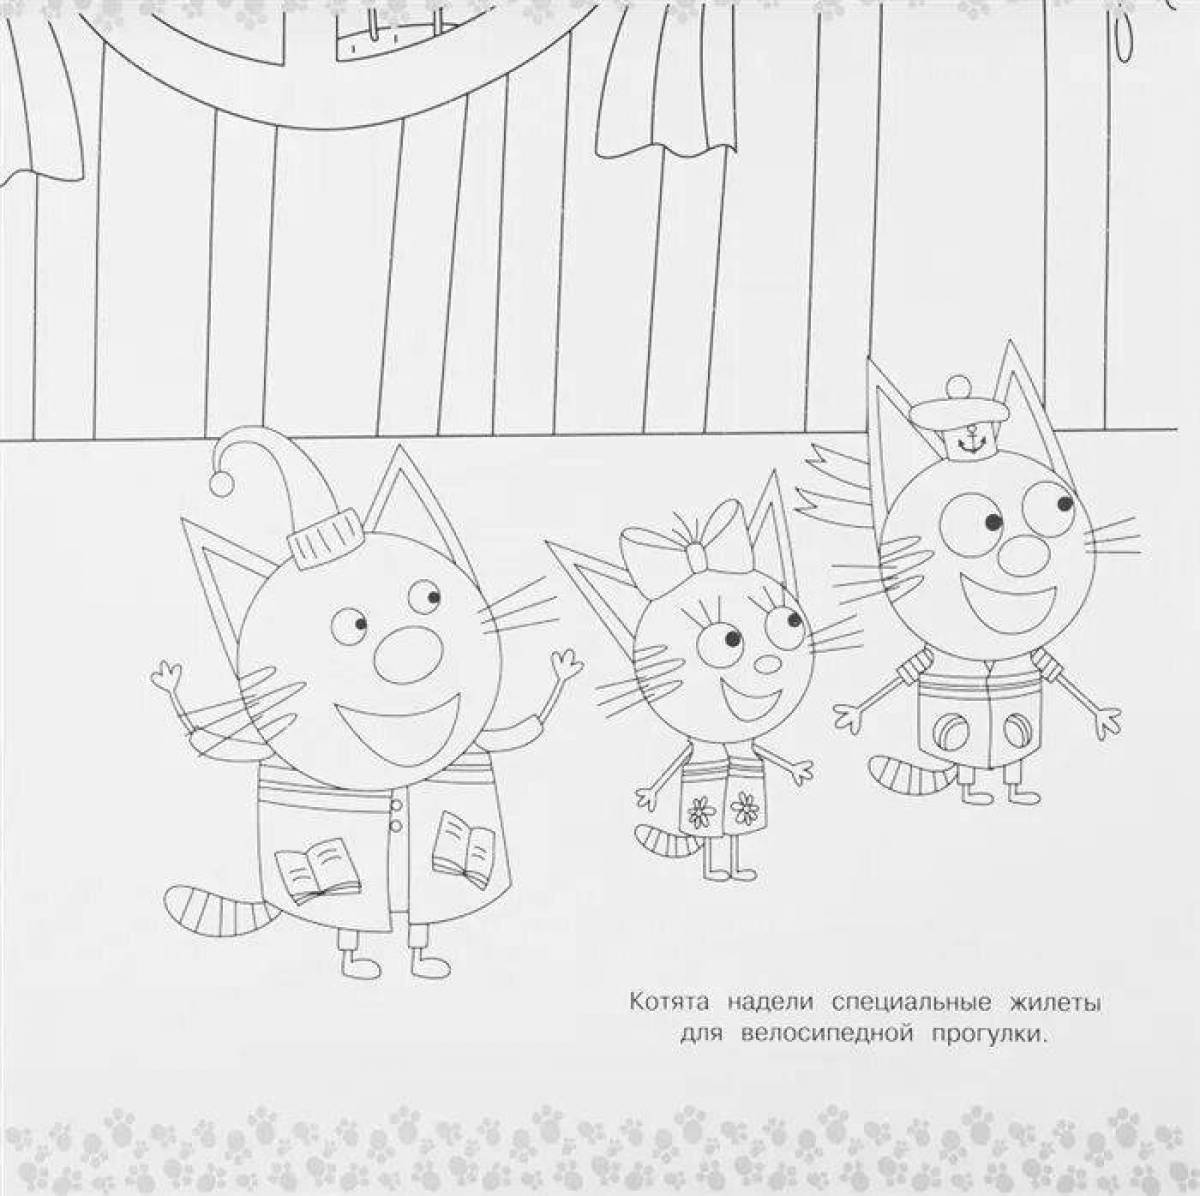 Bright three cats by numbers coloring book